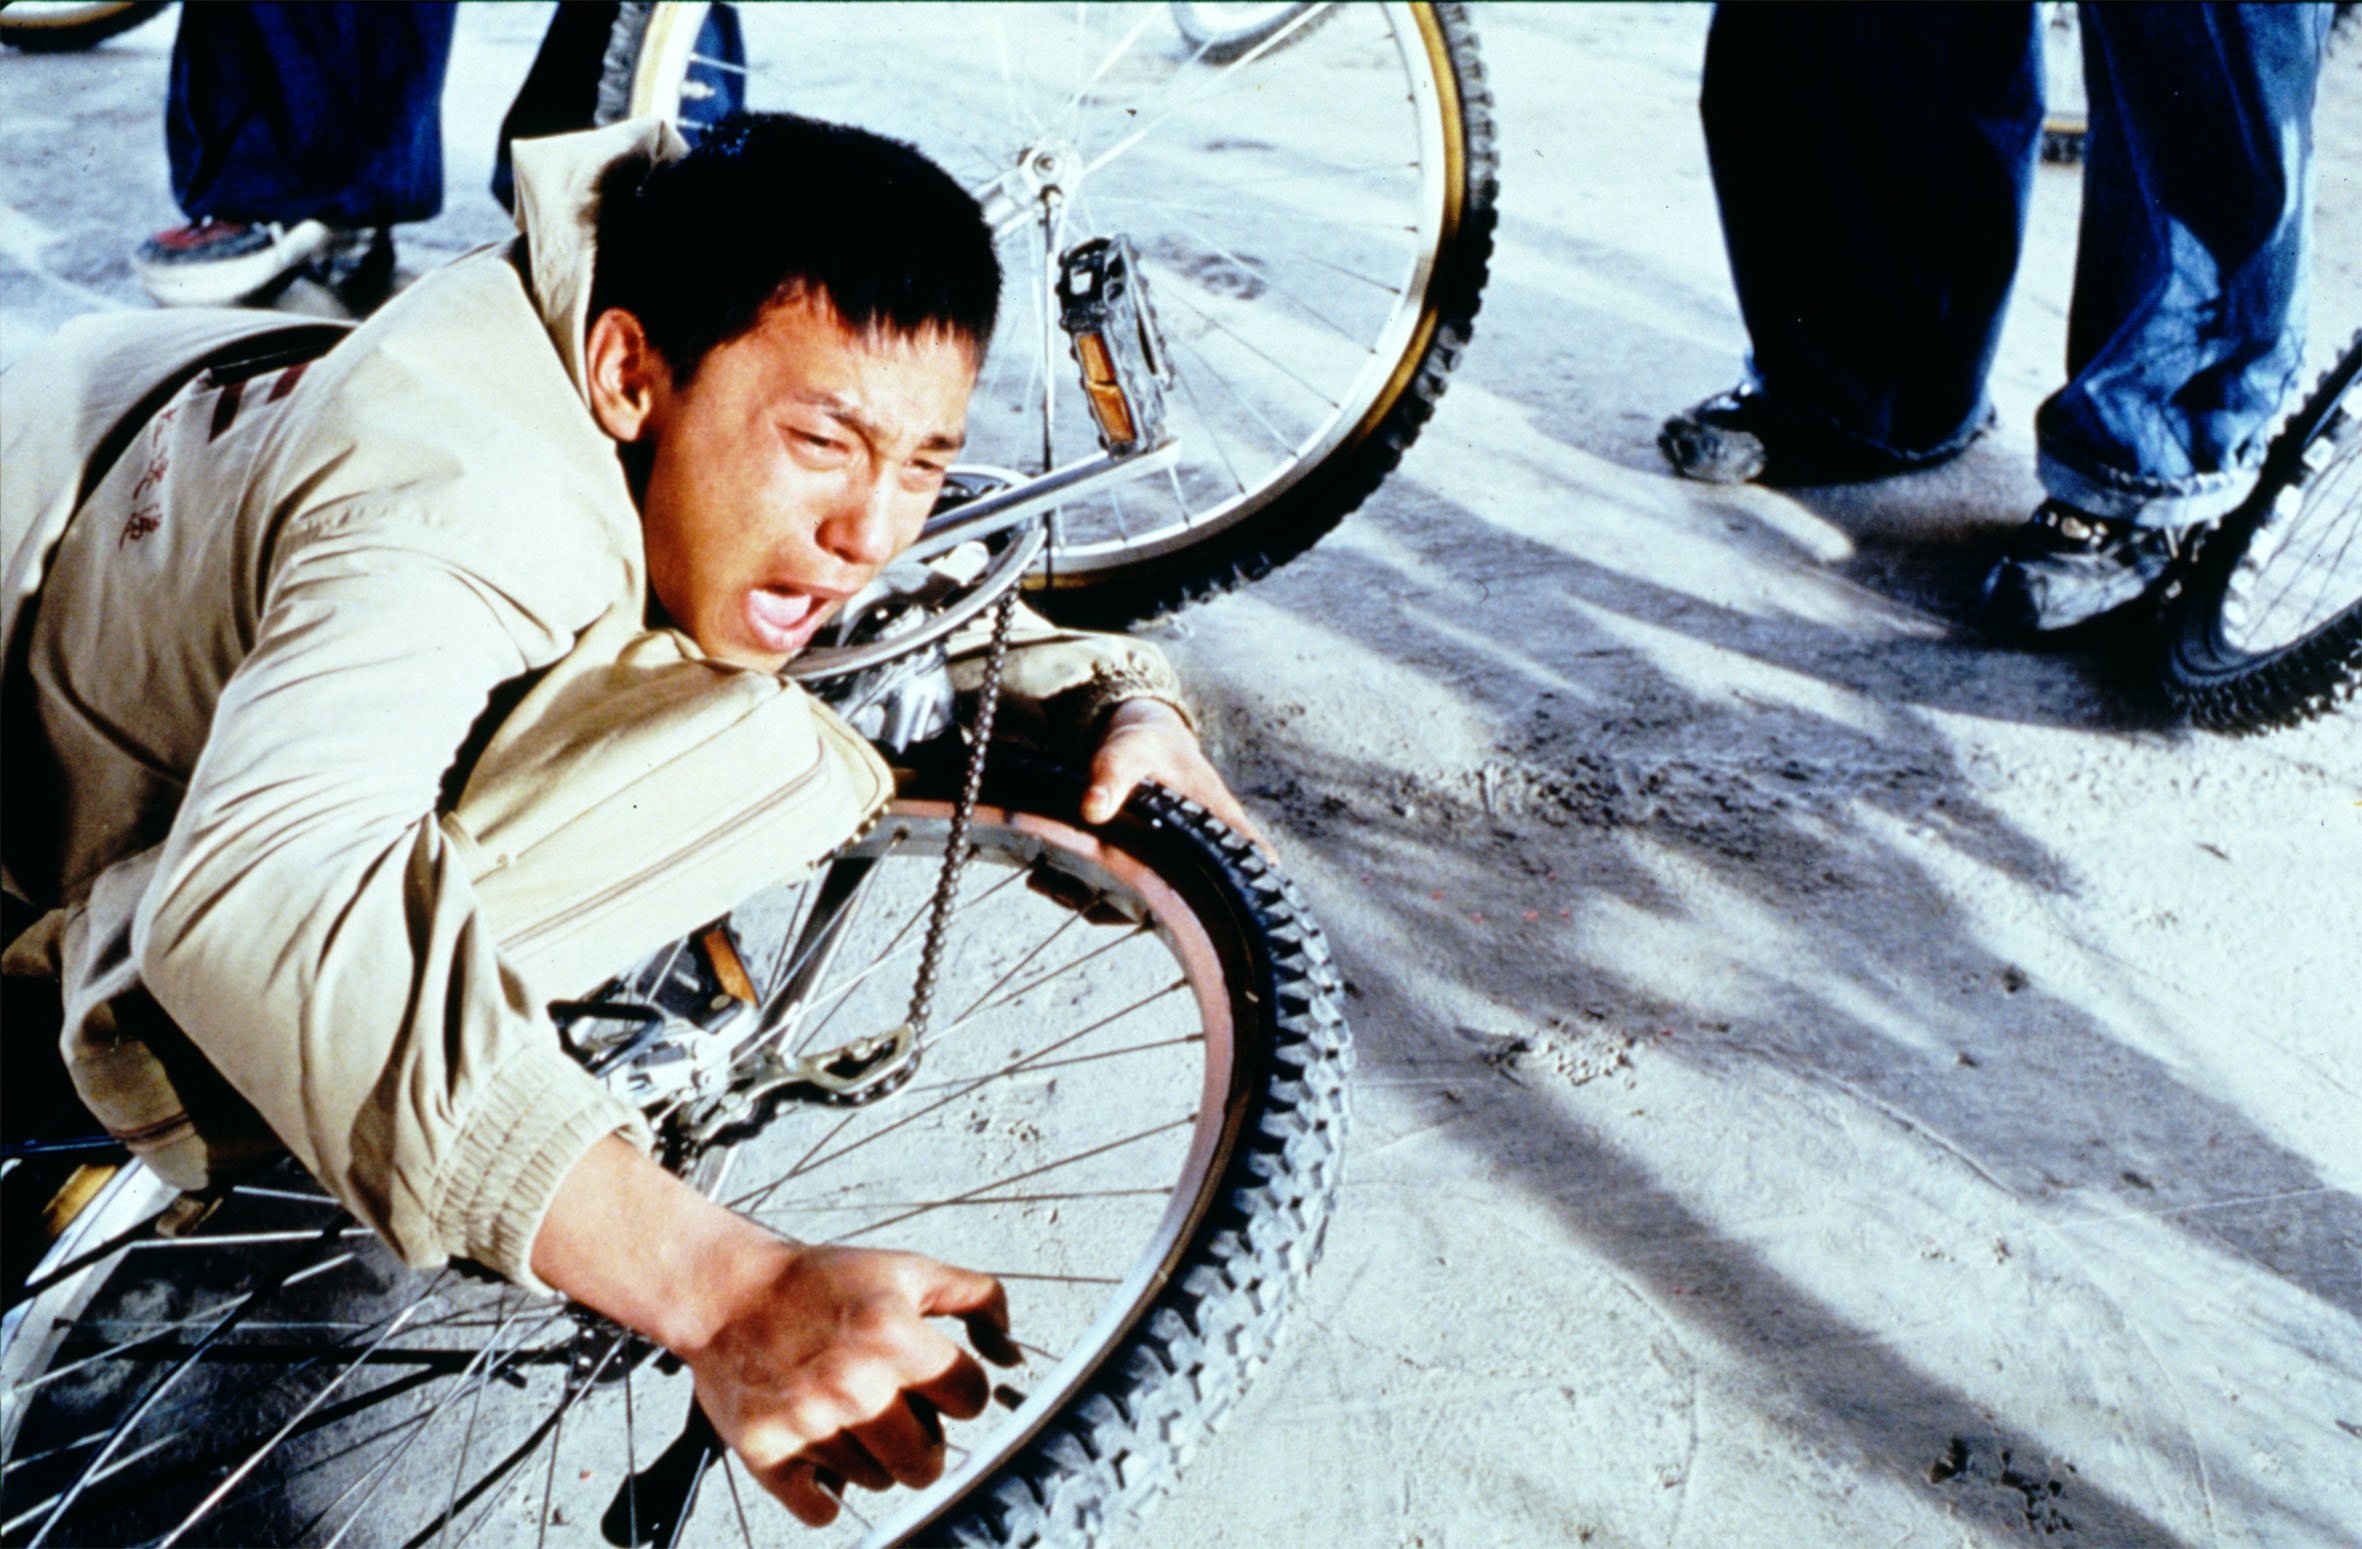 Beijing Initiates Bicycle Registration to Reduce Theft